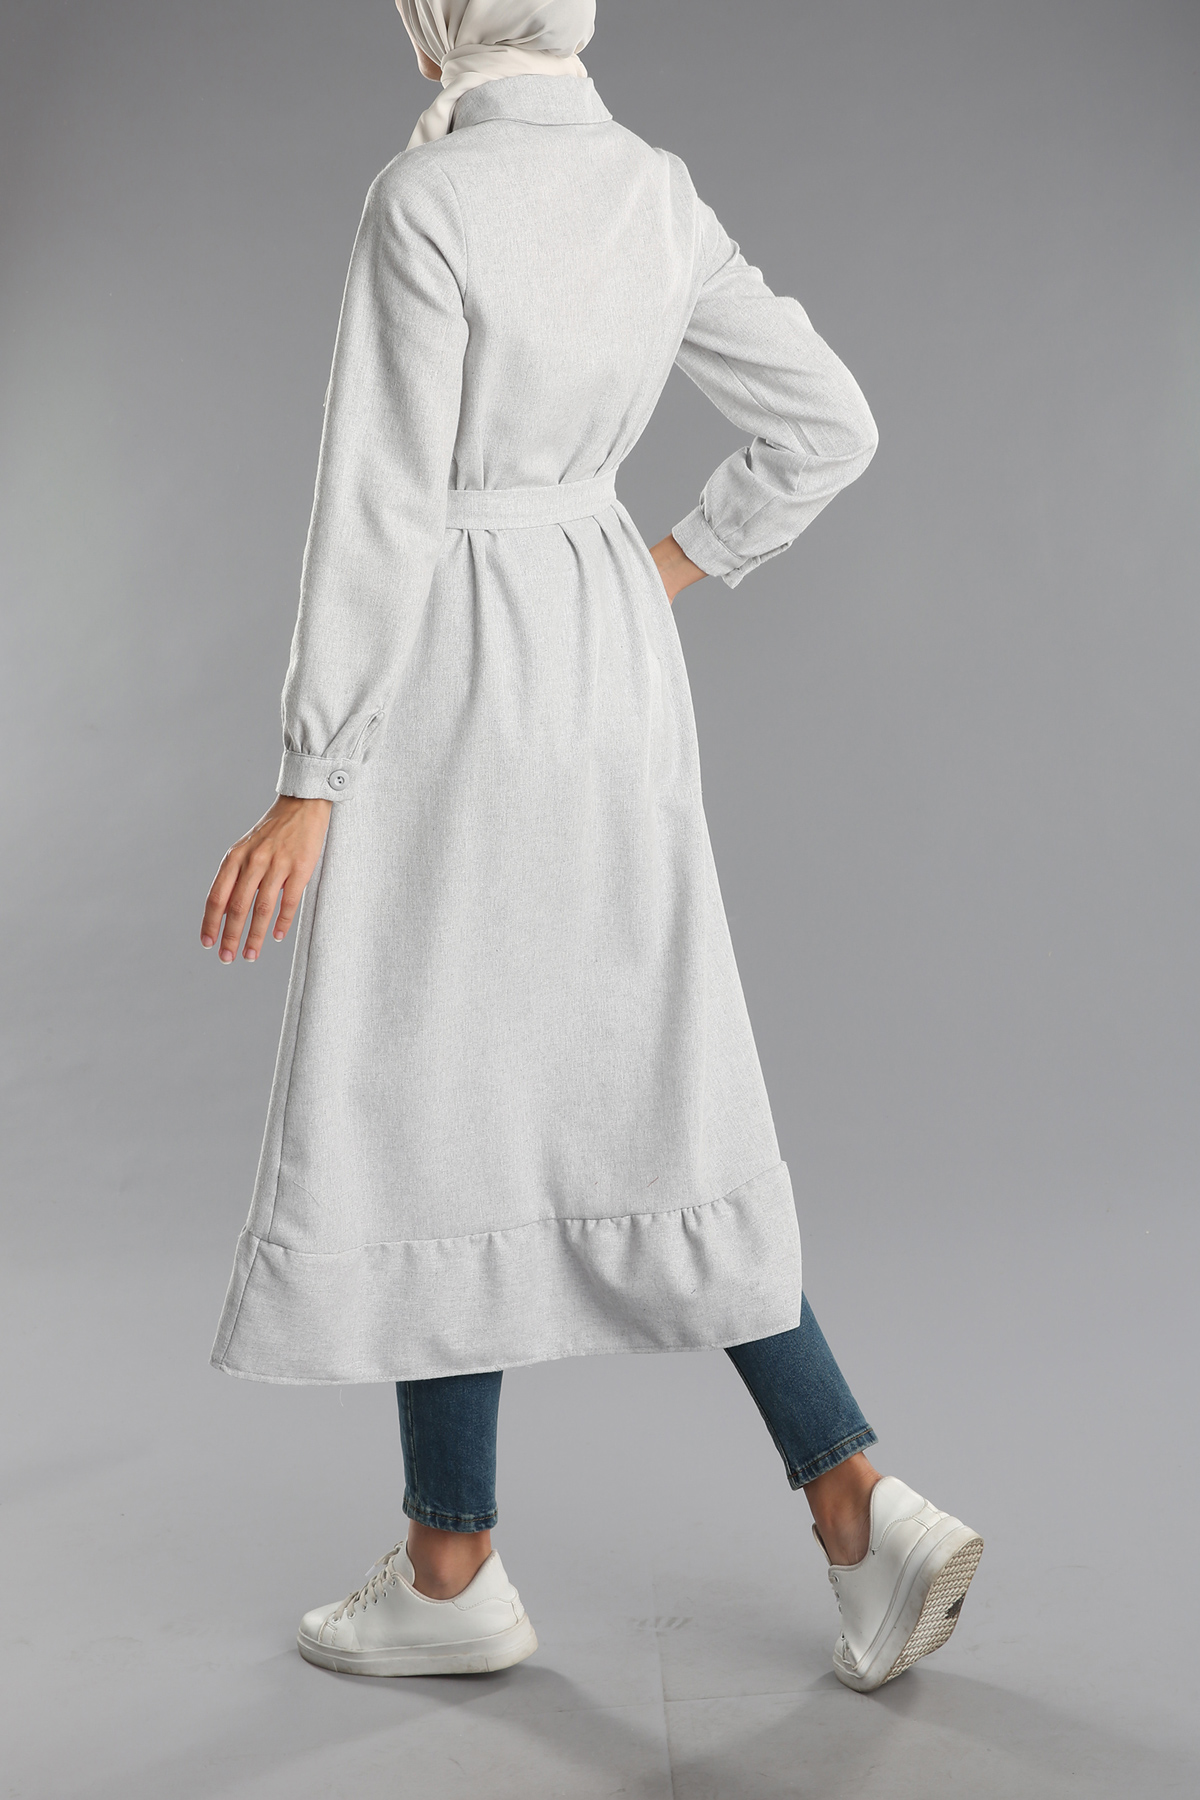 Belted Buttoned Pocket Dress Tunic